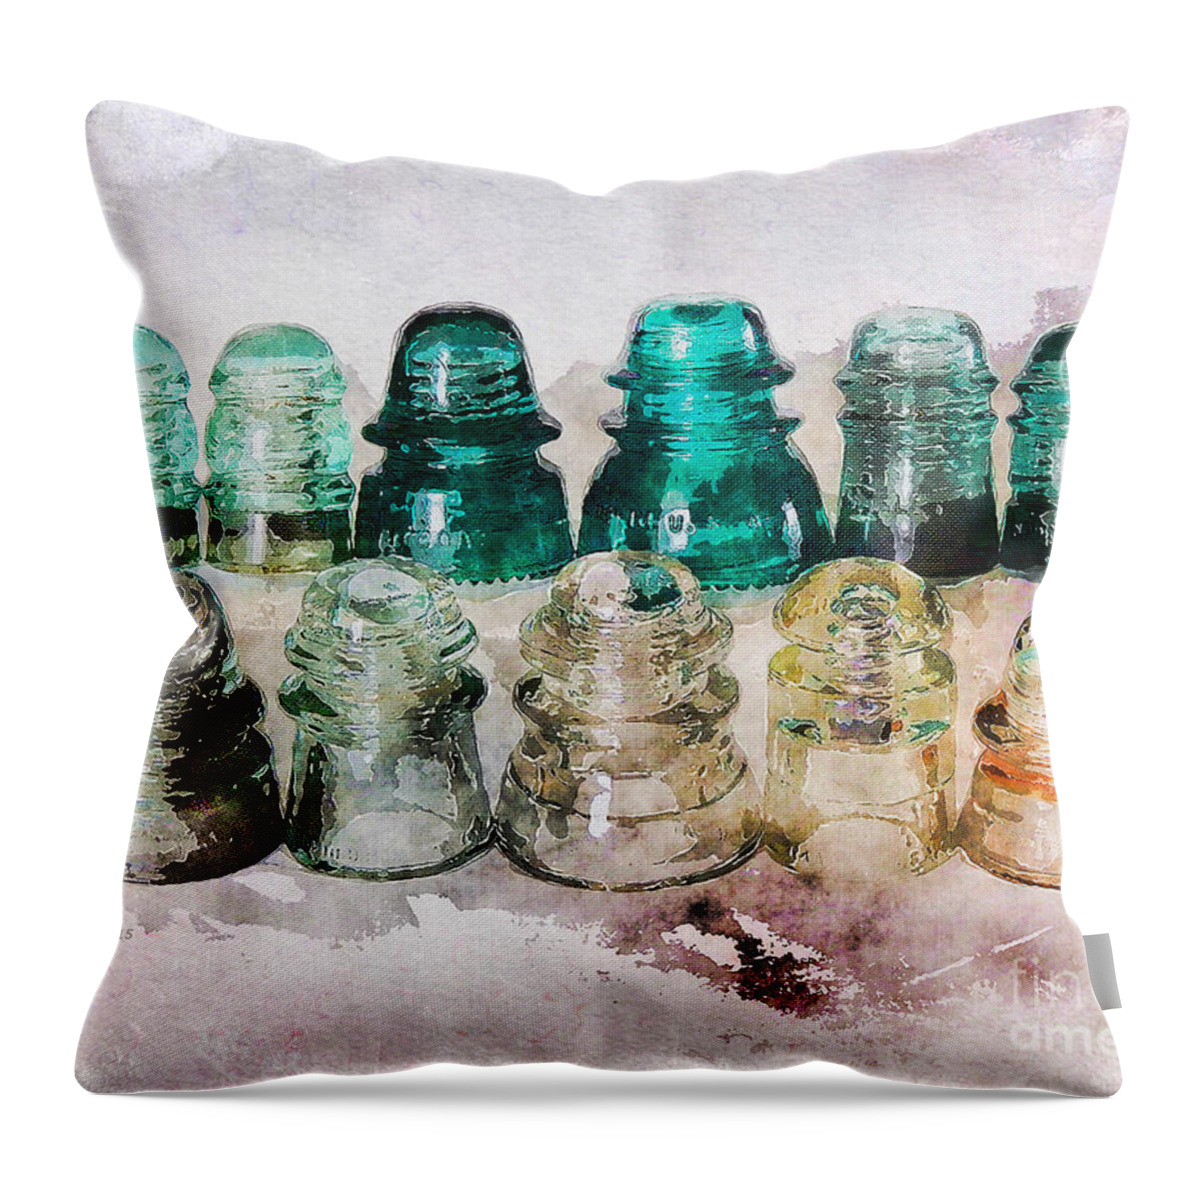 Glass Throw Pillow featuring the photograph Vintage Glass Insulators #1 by Phil Perkins